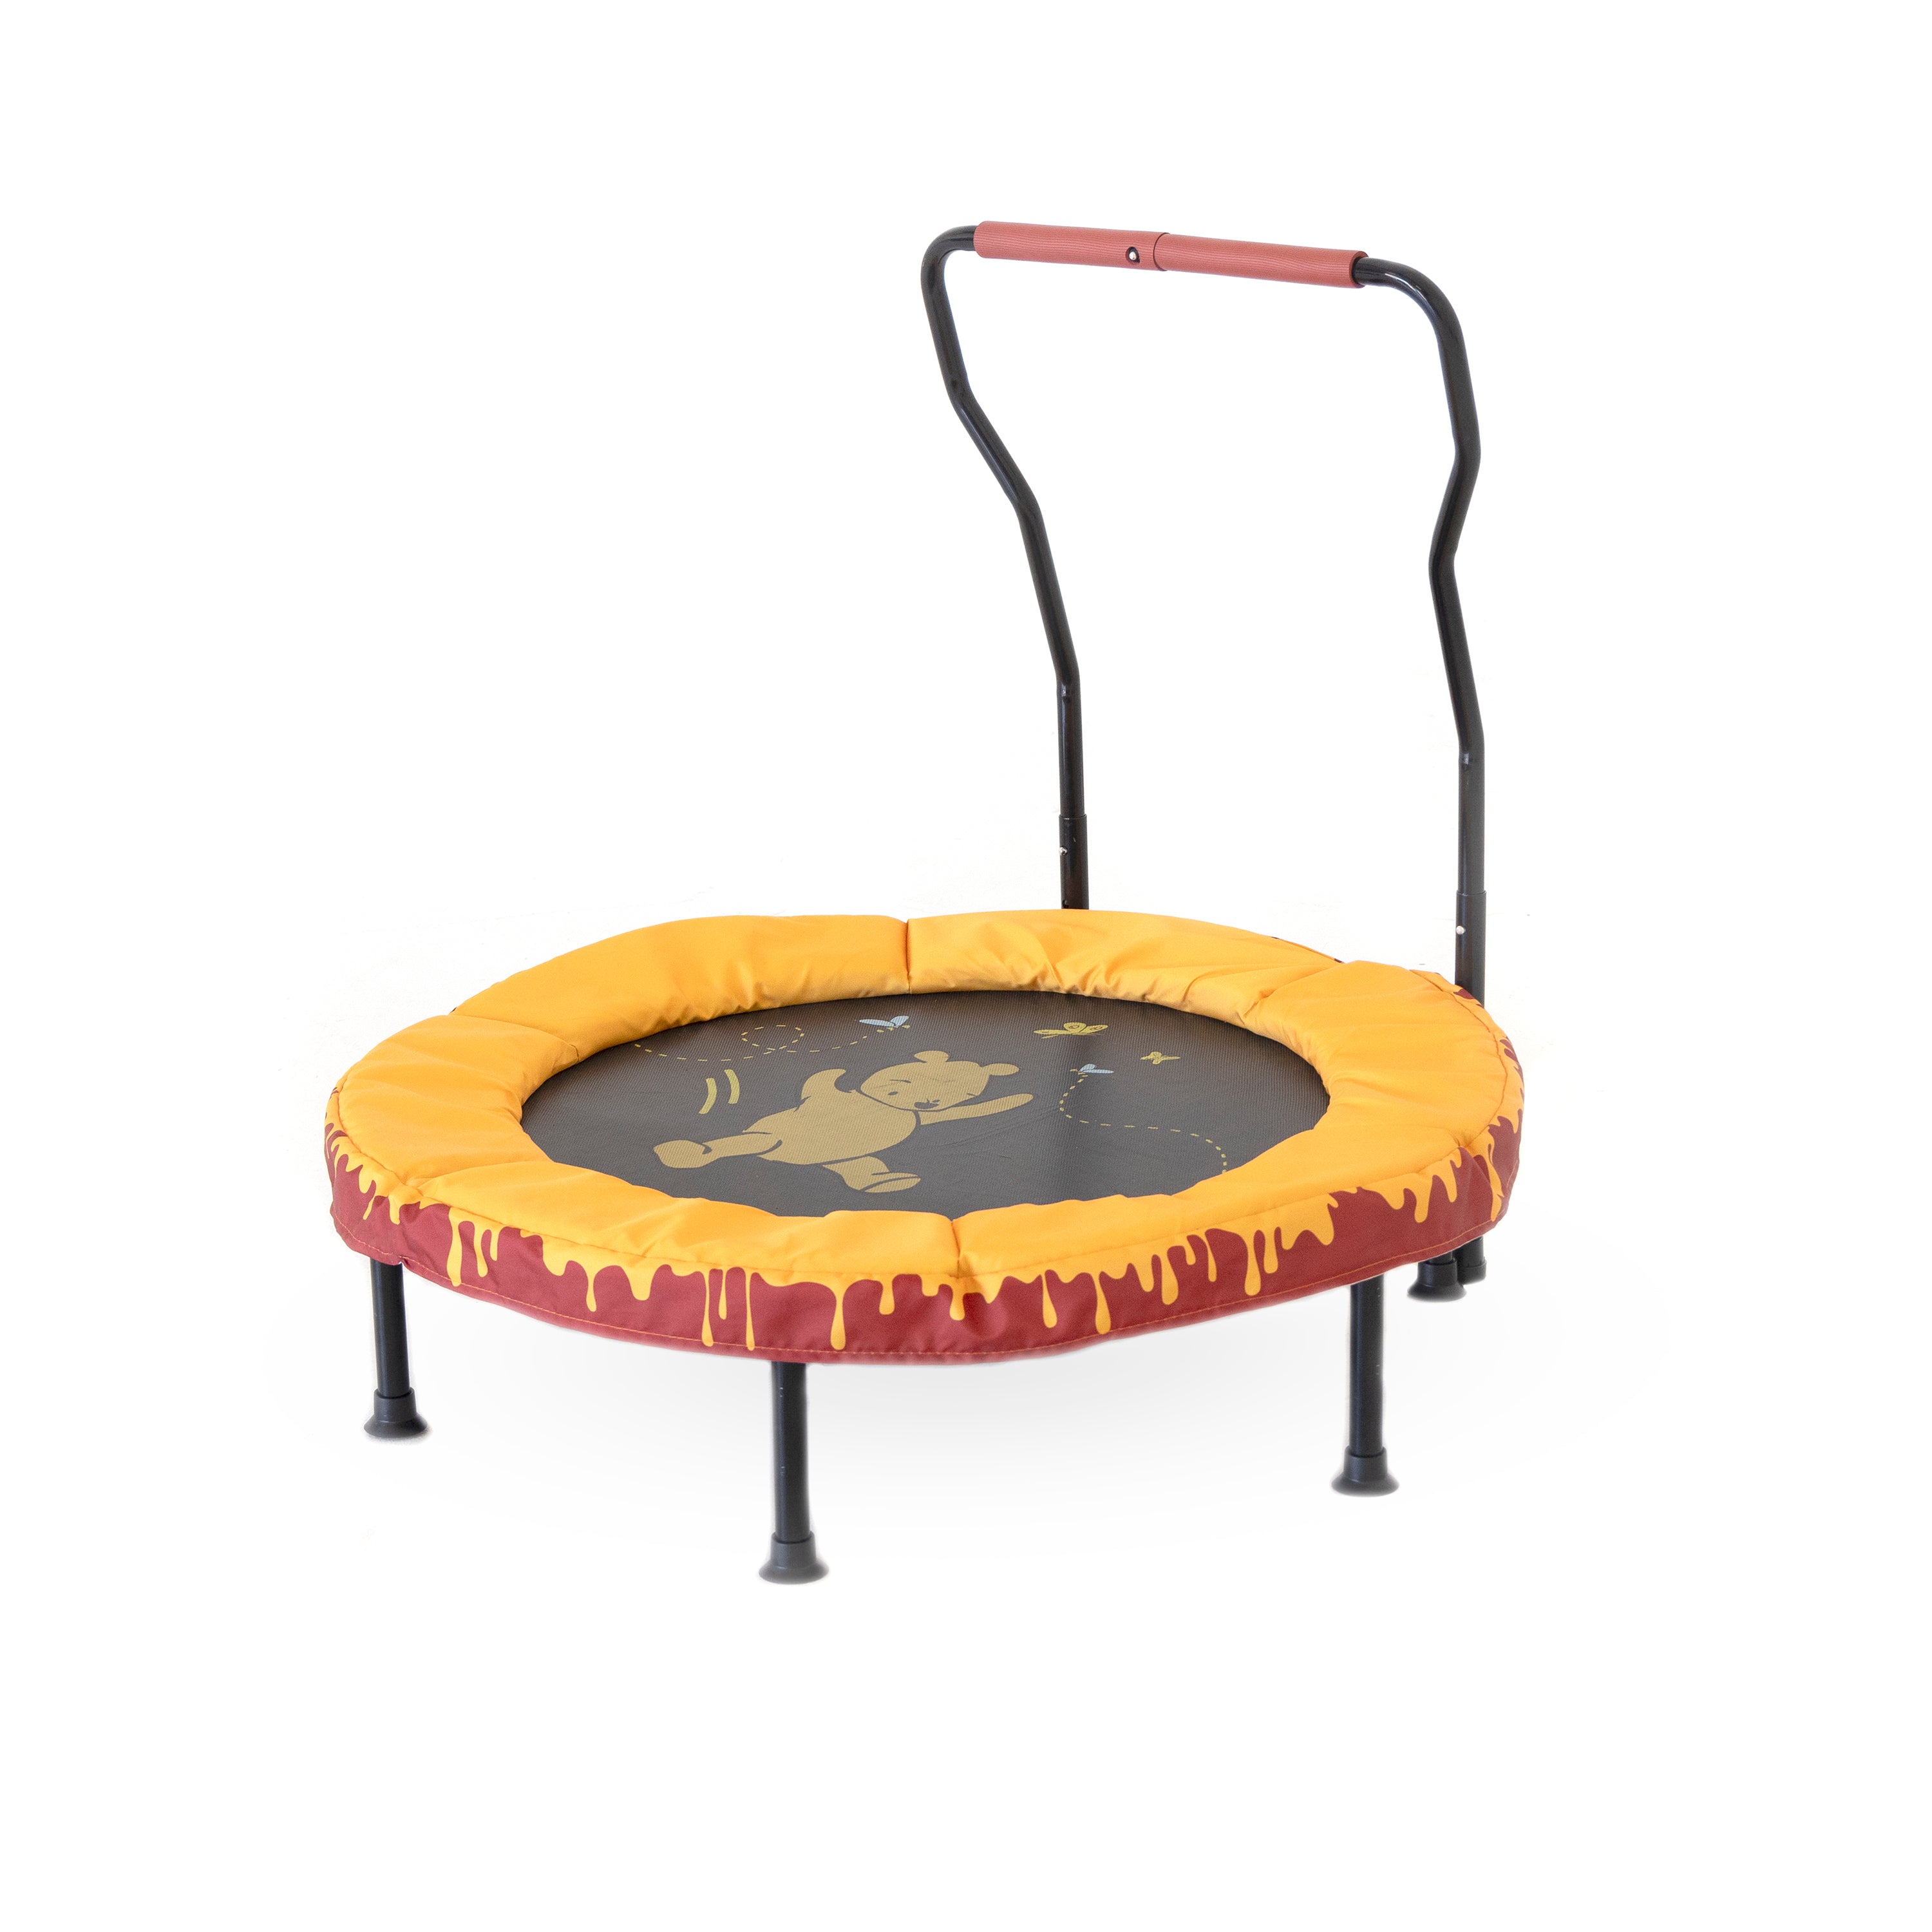 The 36” toddler trampoline with handlebar has a red and yellow honey-drip spring pad design and a vintage Winnie the Pooh print on the jump mat. 